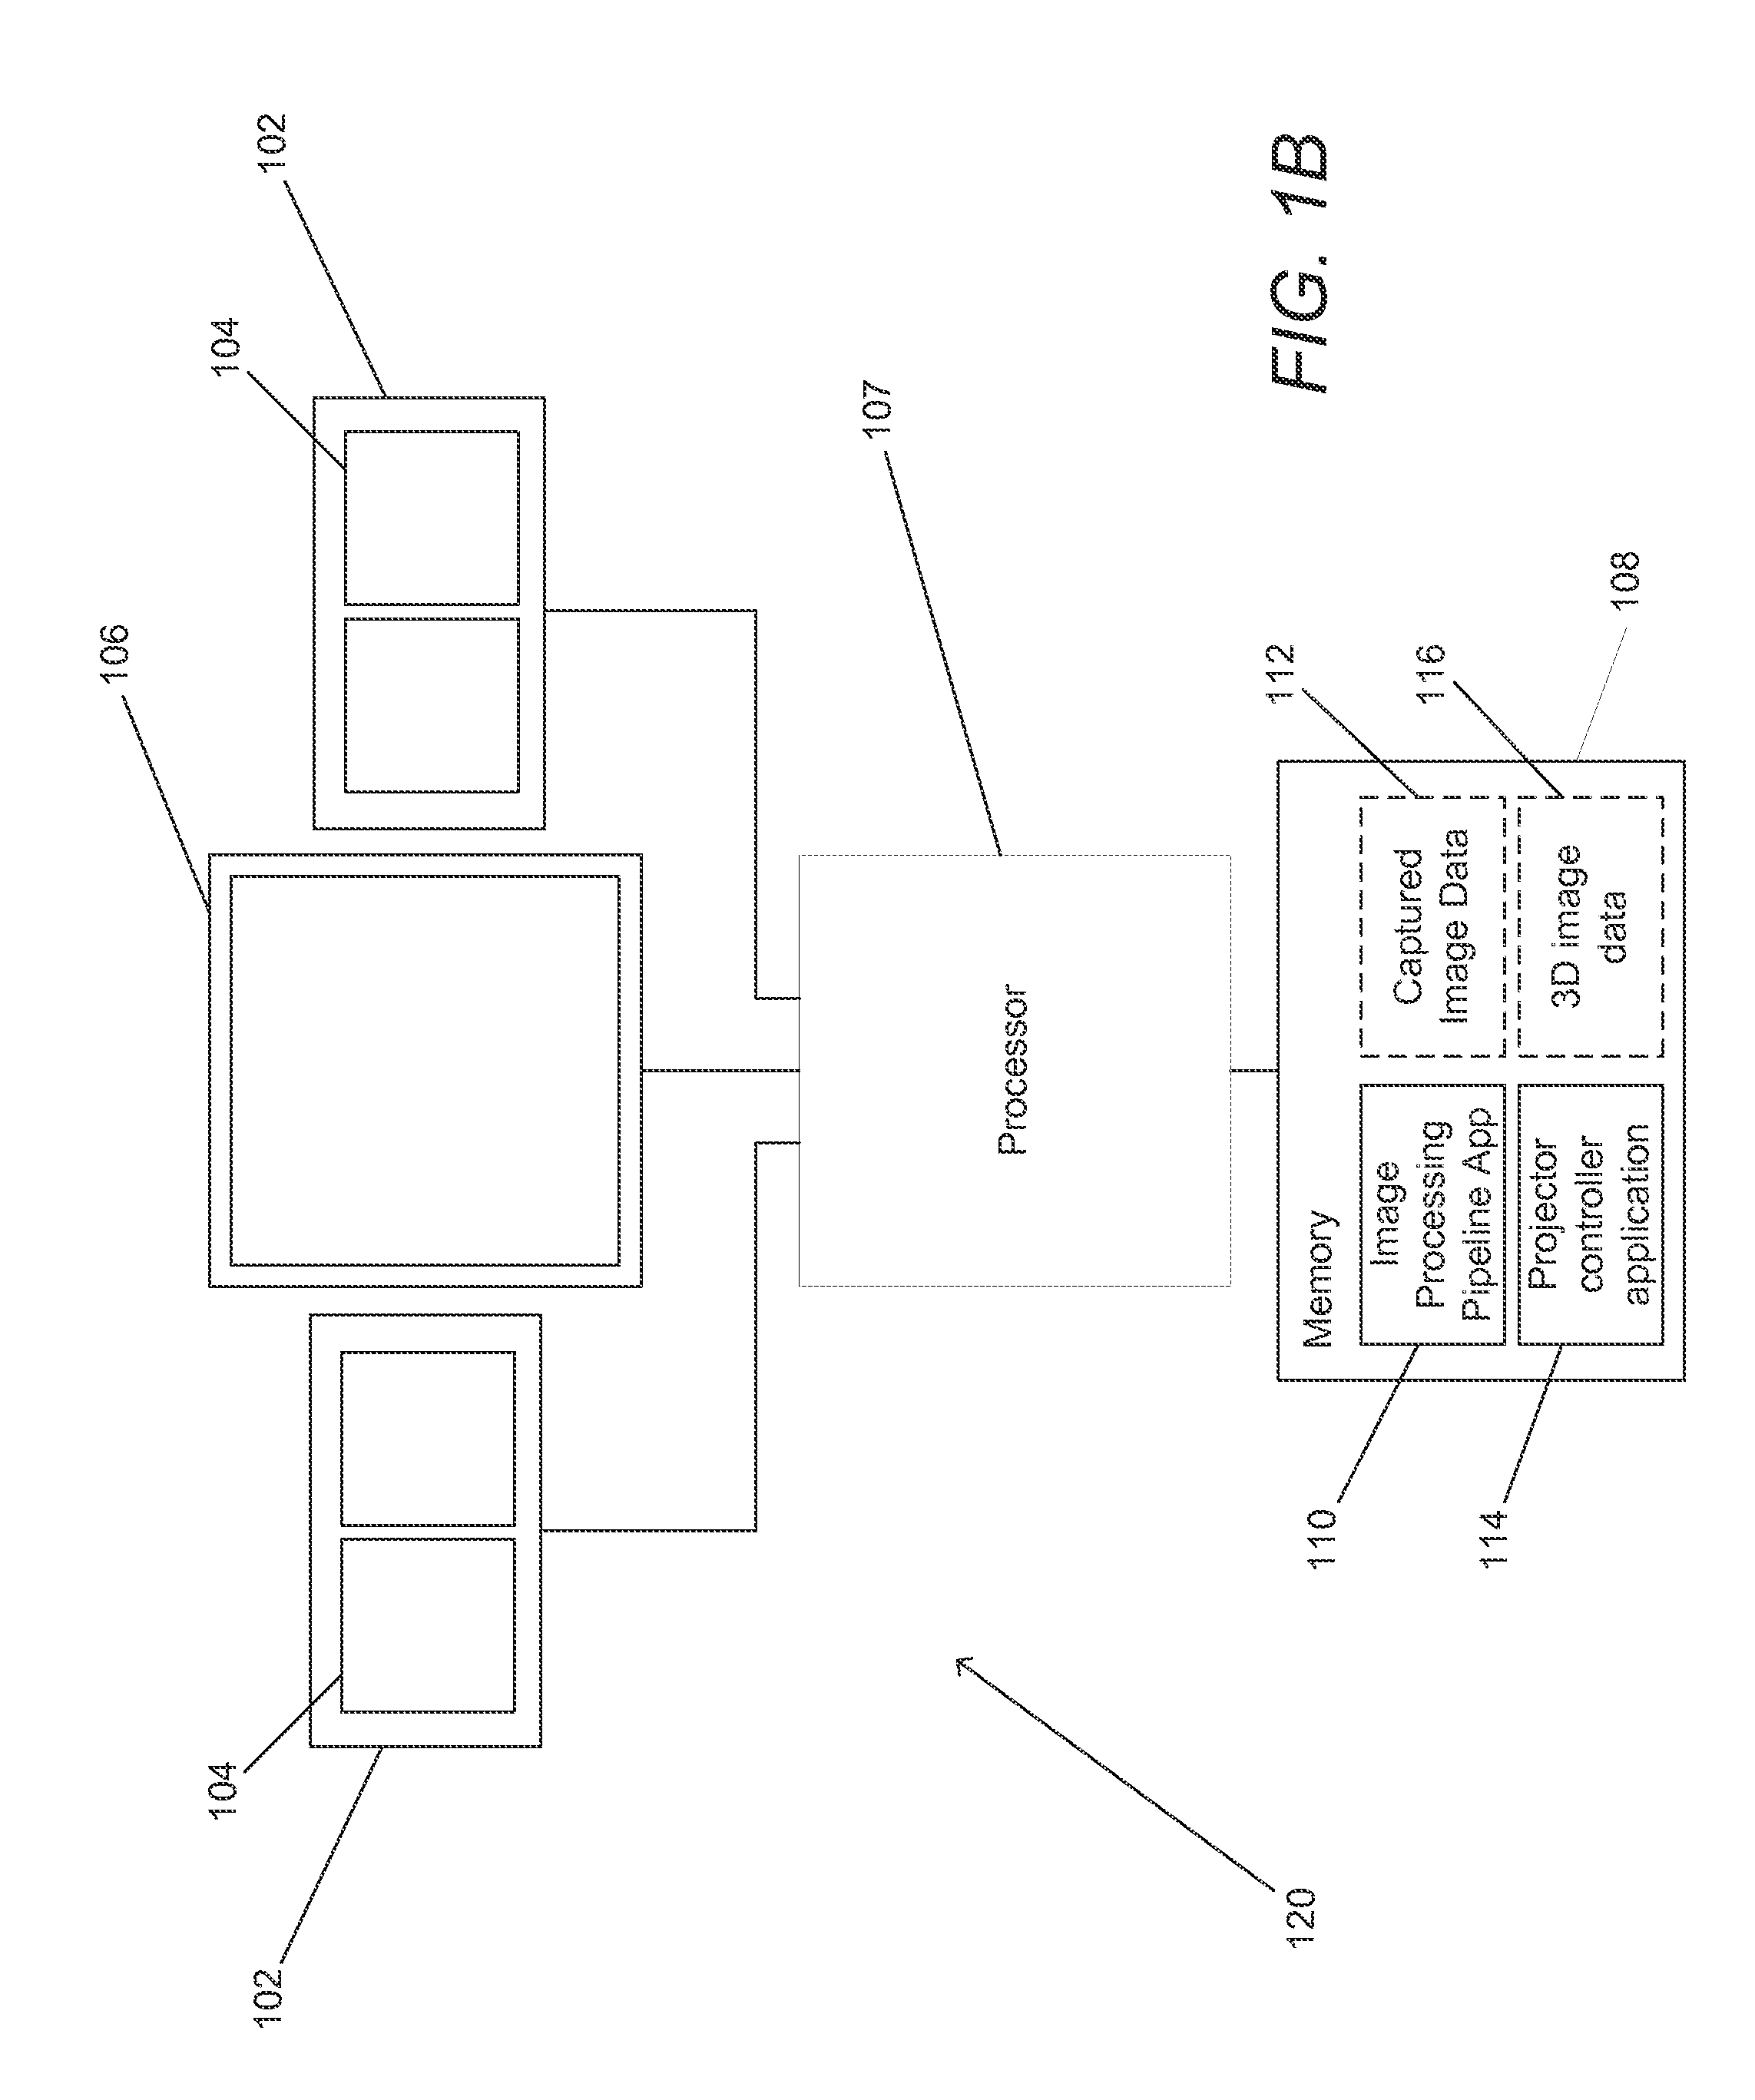 Systems and Methods for Estimating Depth from Projected Texture using Camera Arrays